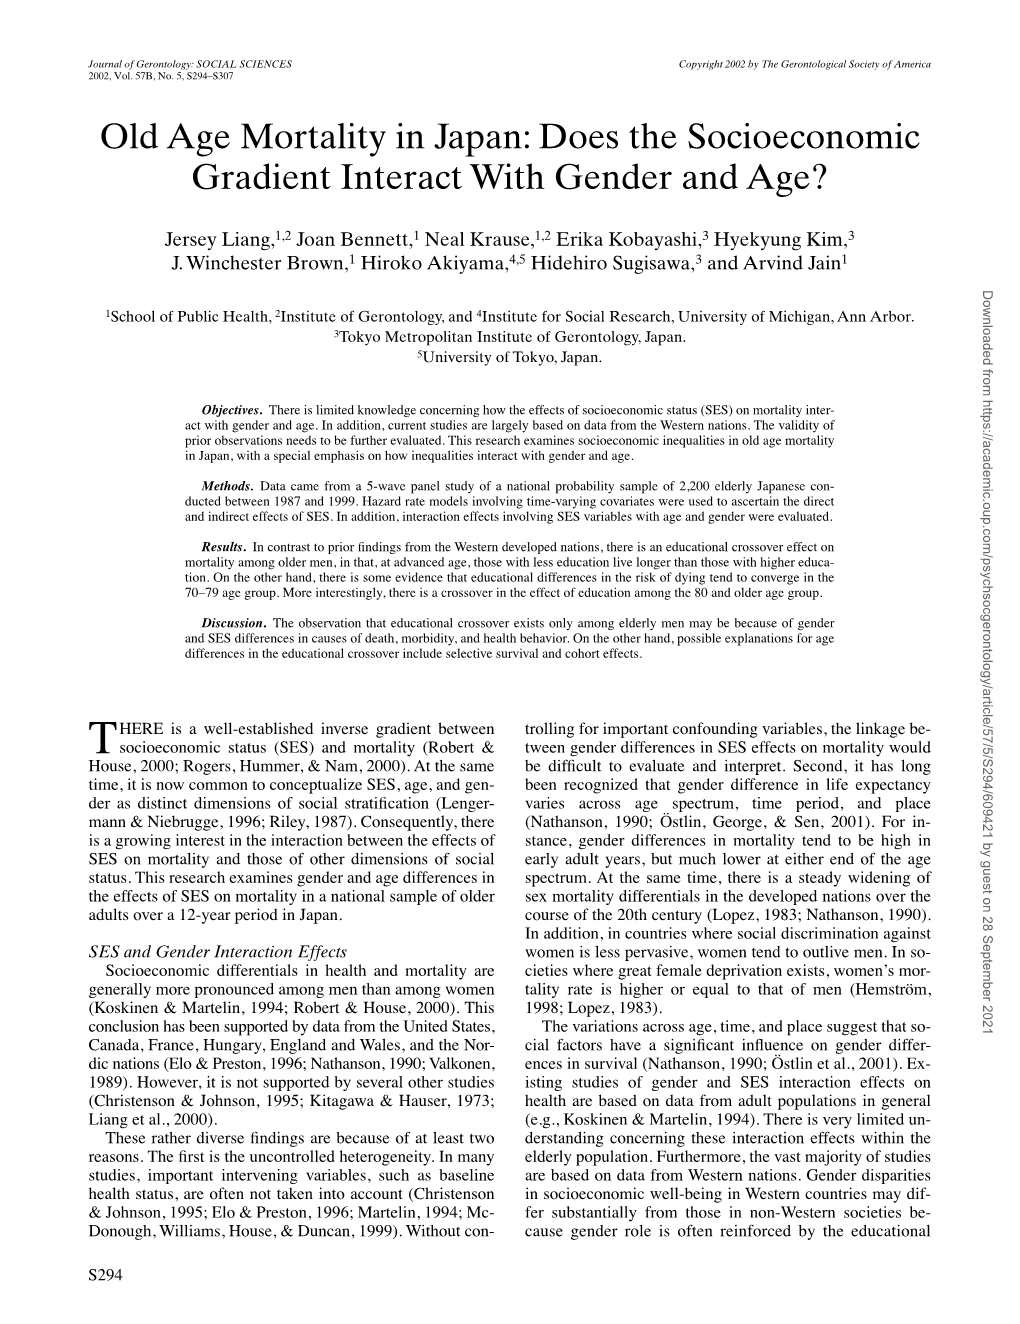 Old Age Mortality in Japan: Does the Socioeconomic Gradient Interact with Gender and Age?